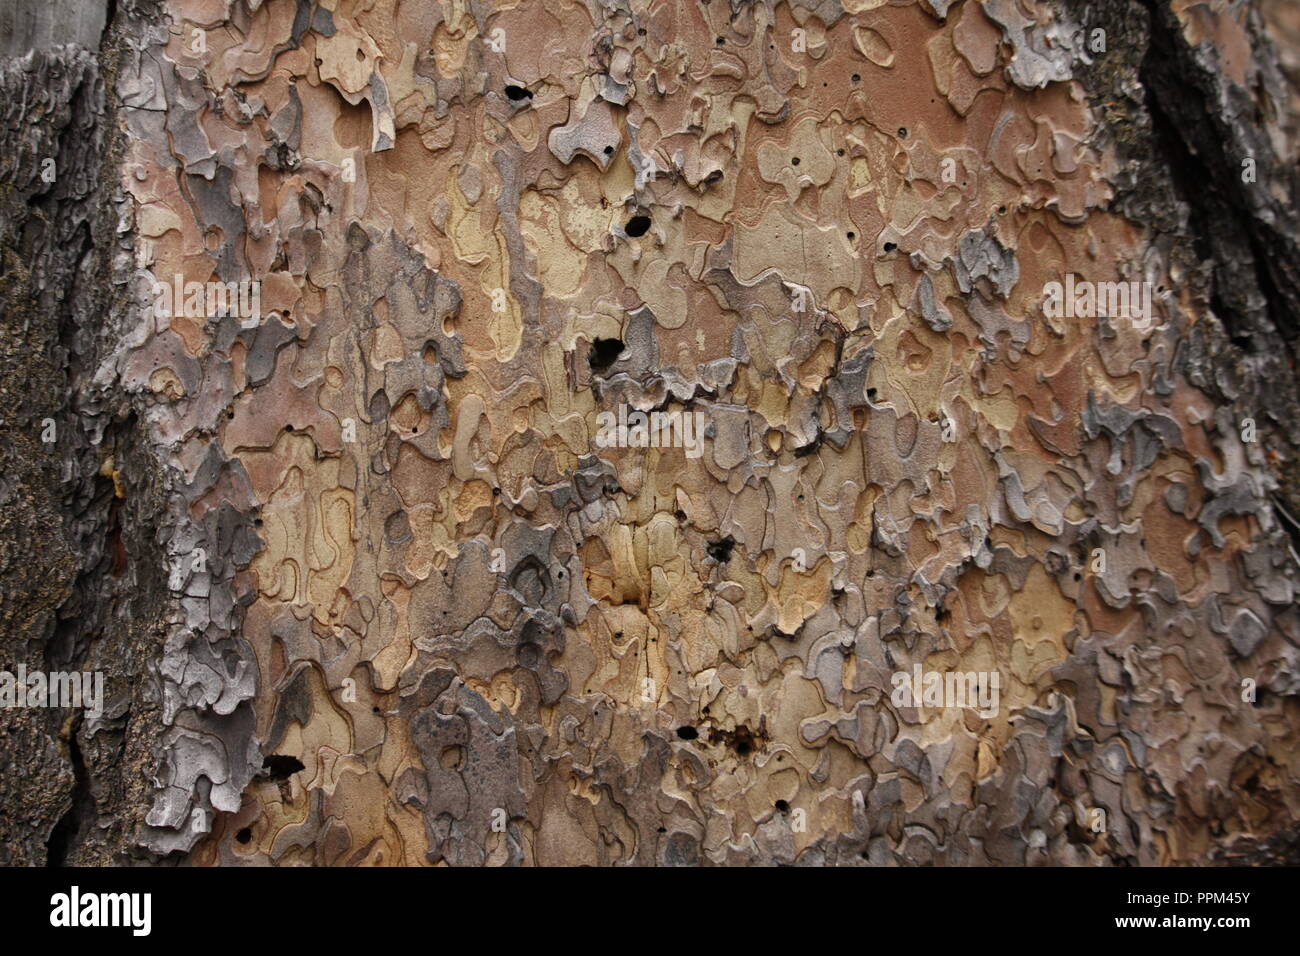 Painted Puzzle Pieces: Ponderosa Pine Tree Bark in Detail Stock Photo